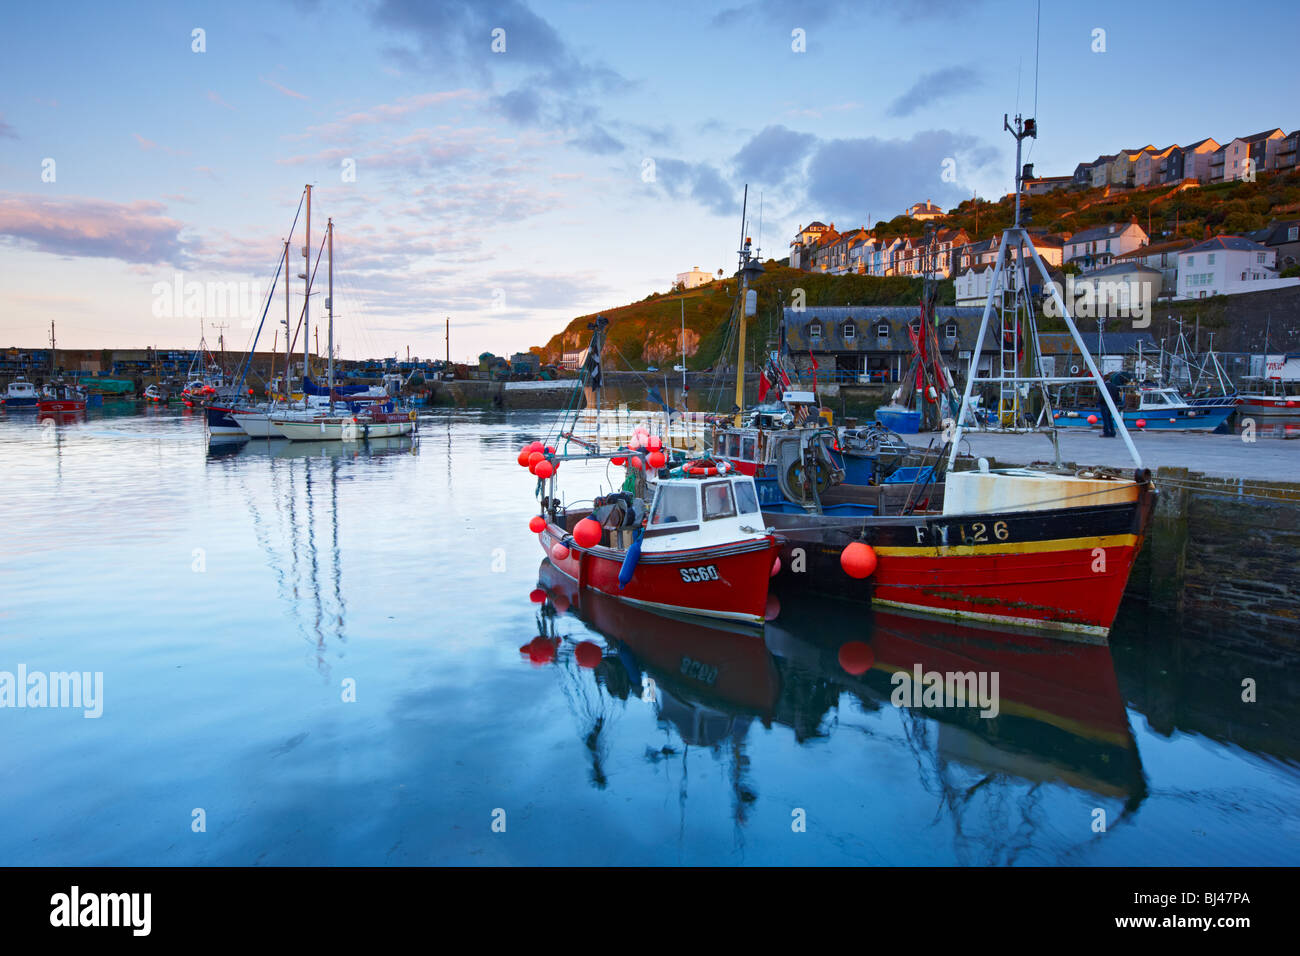 A calm evening at Mevagissey Harbour Stock Photo